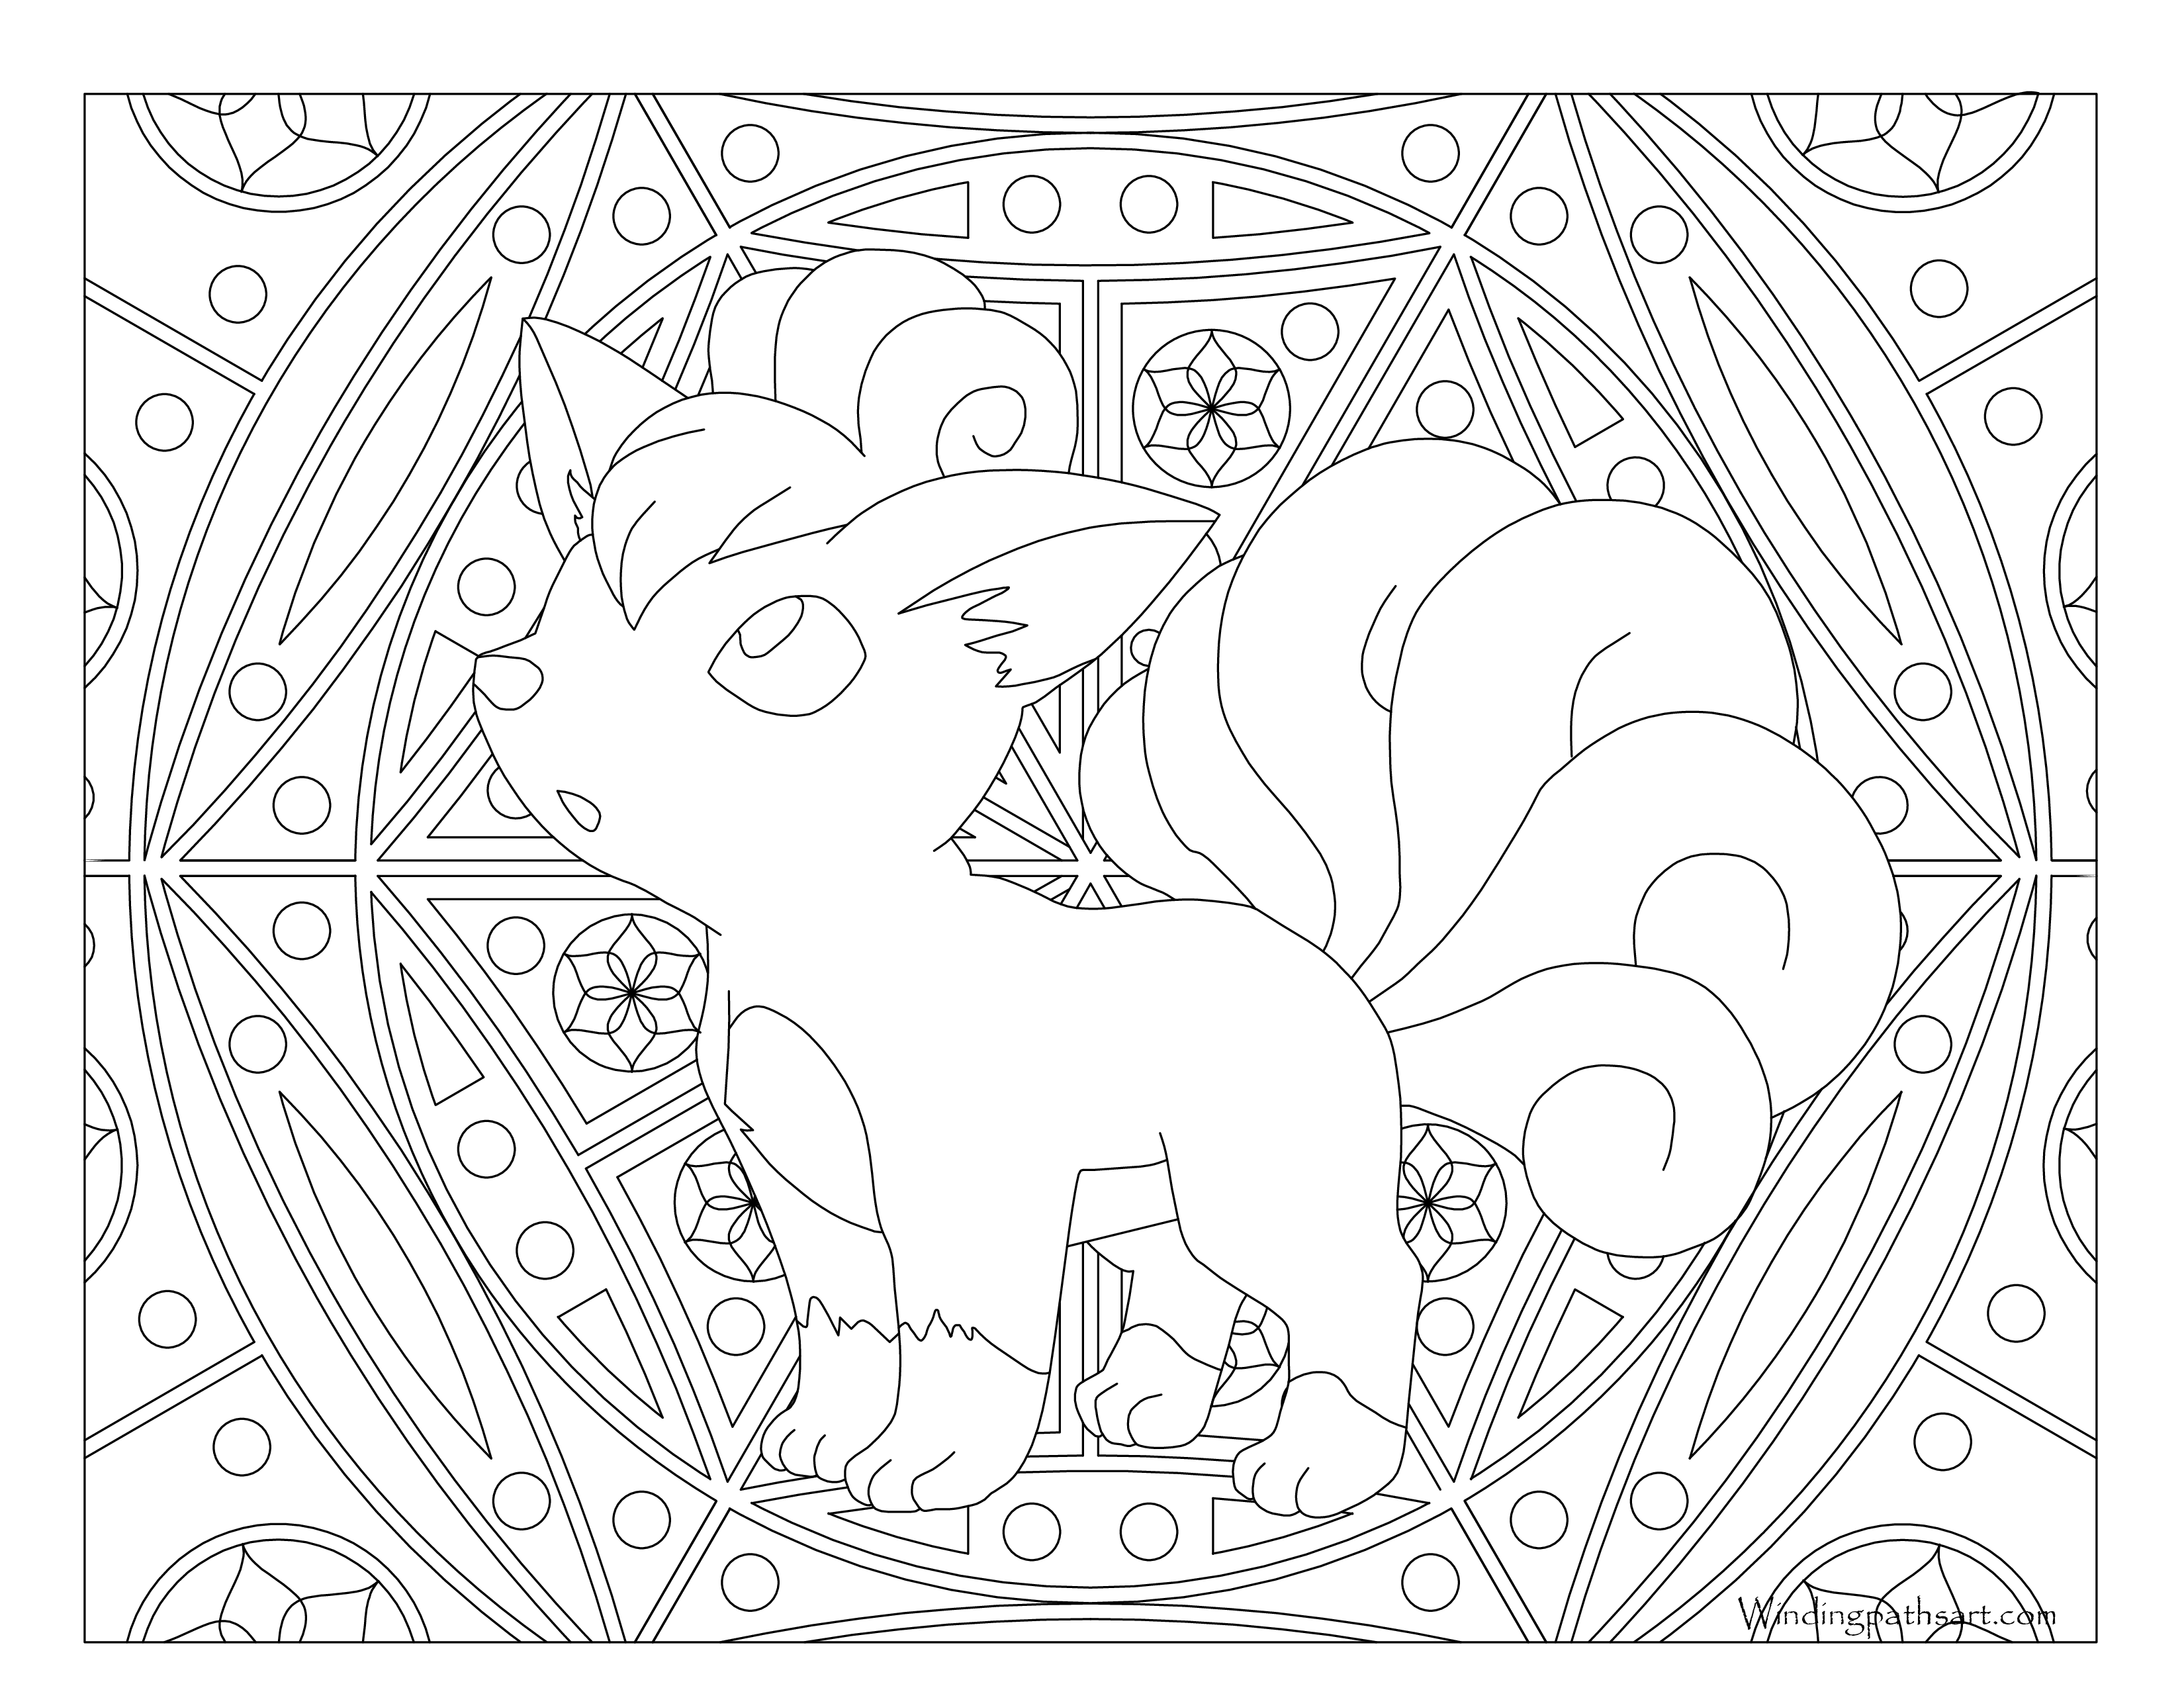 Adult Pokemon Coloring Page Vulpix